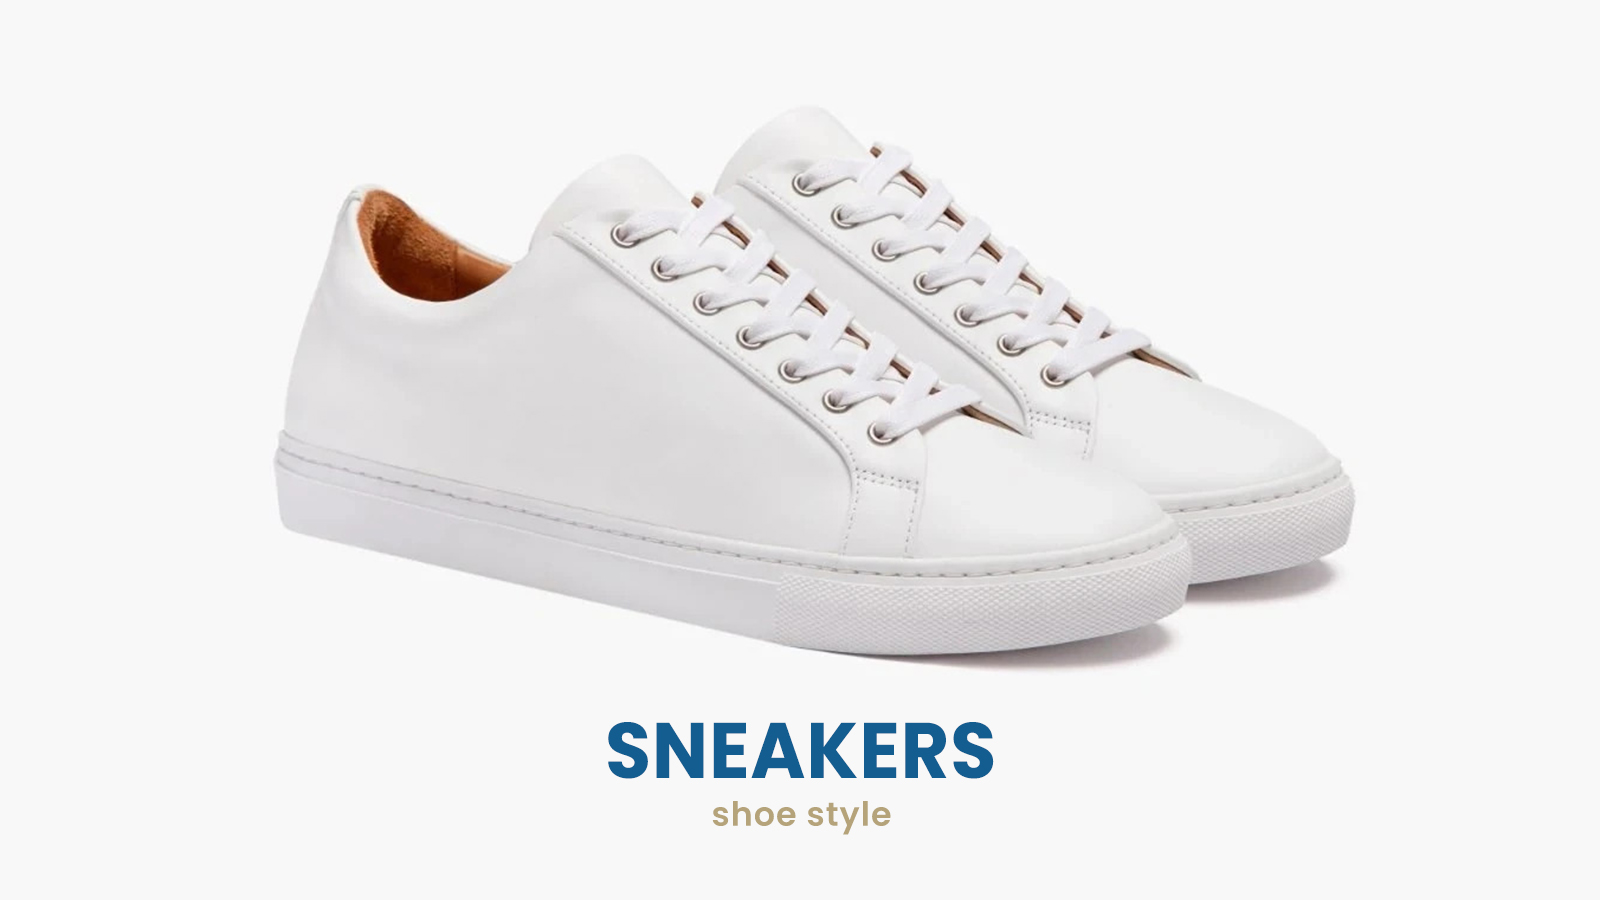 sneakers shoes style for men